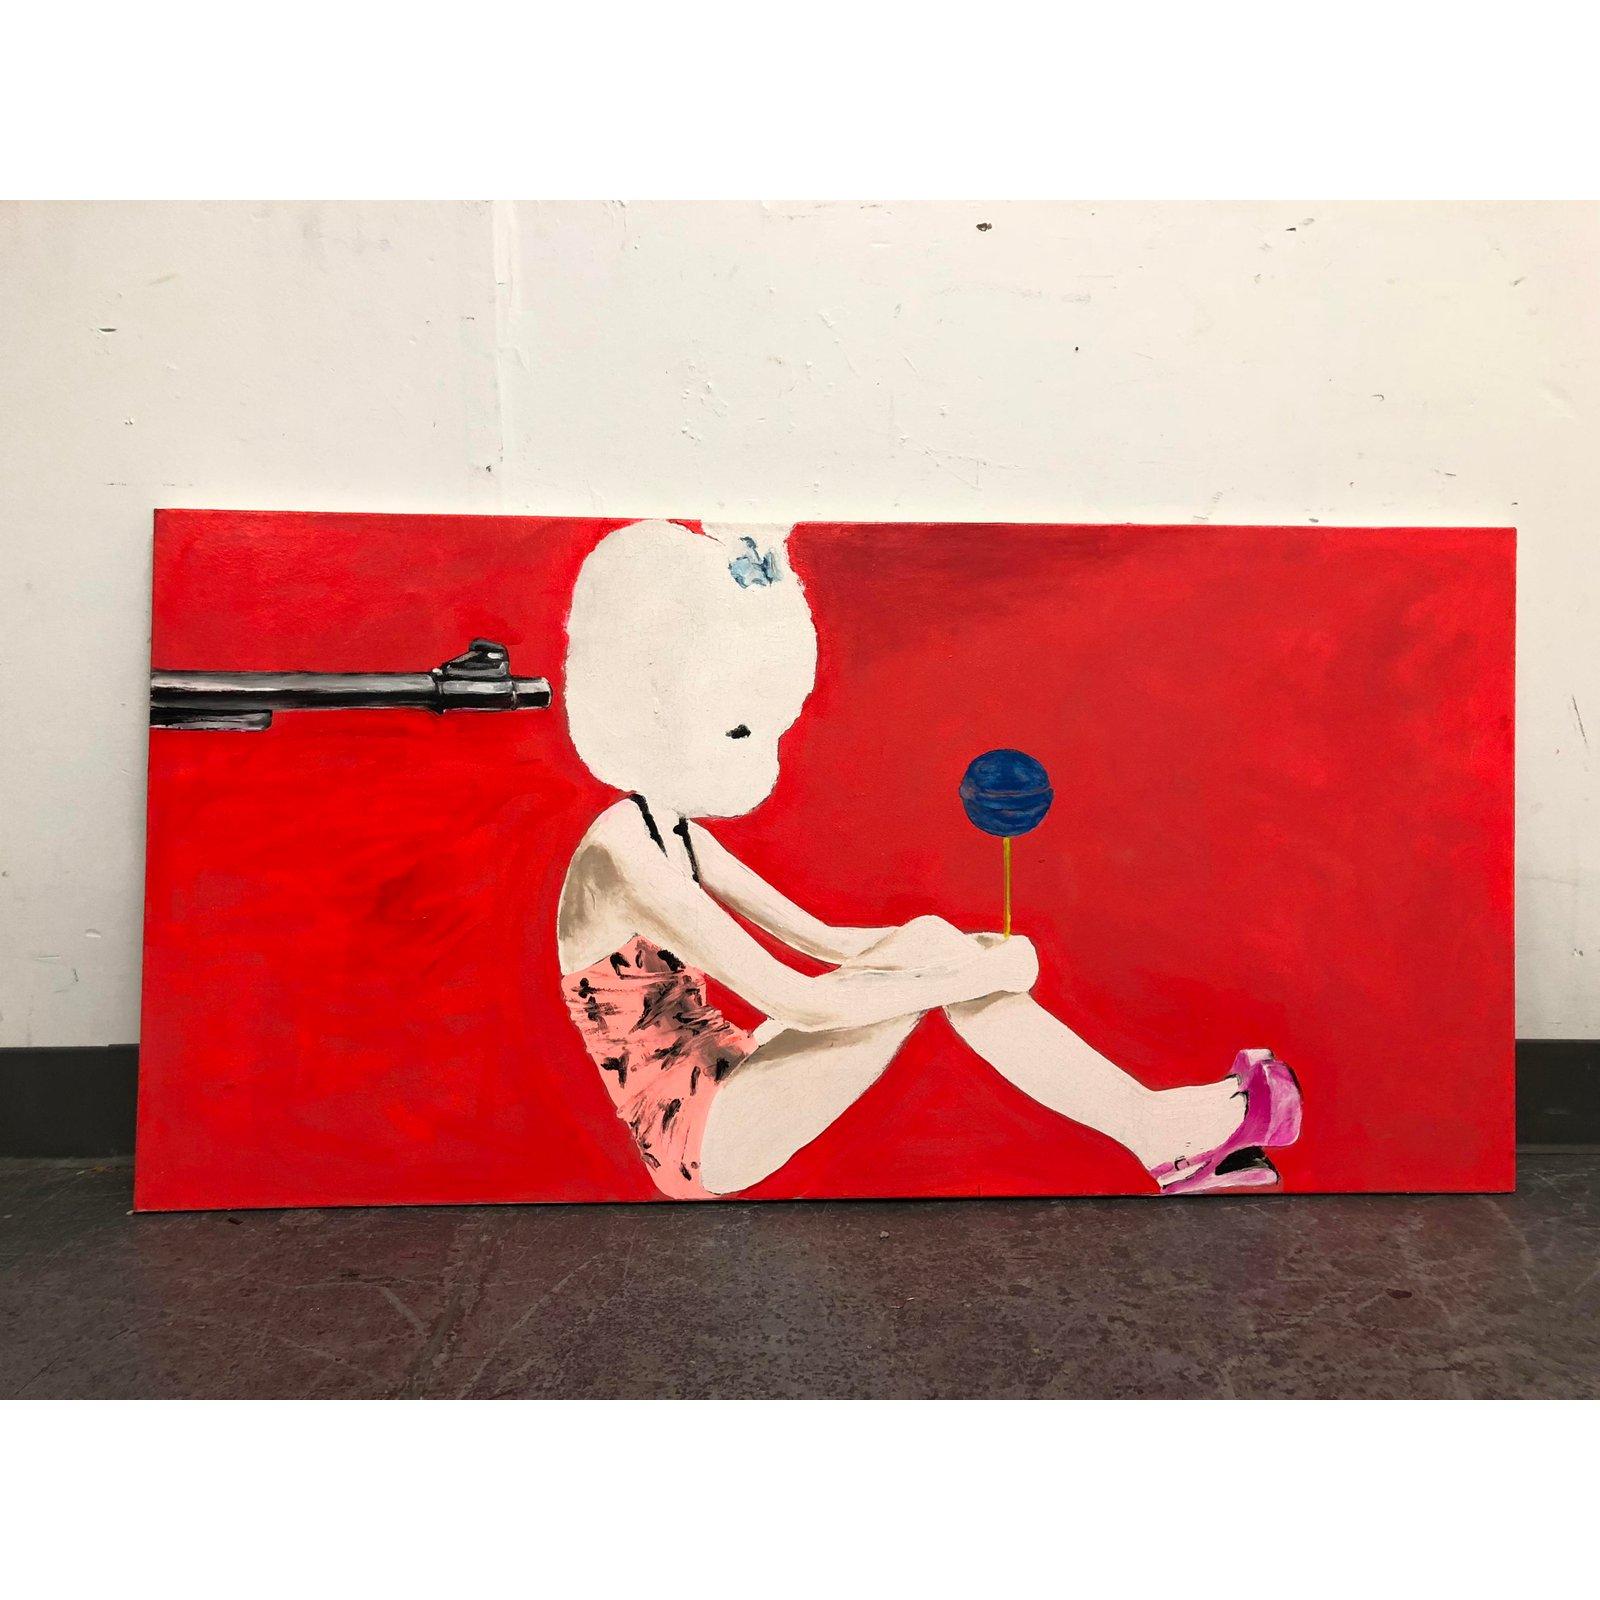 An original artwork by Simone Kocher from 2009. Subject is a fire arm pointed at the back of a girl's head while she wears heels and holds a blow-pop. The artist, says of her work 